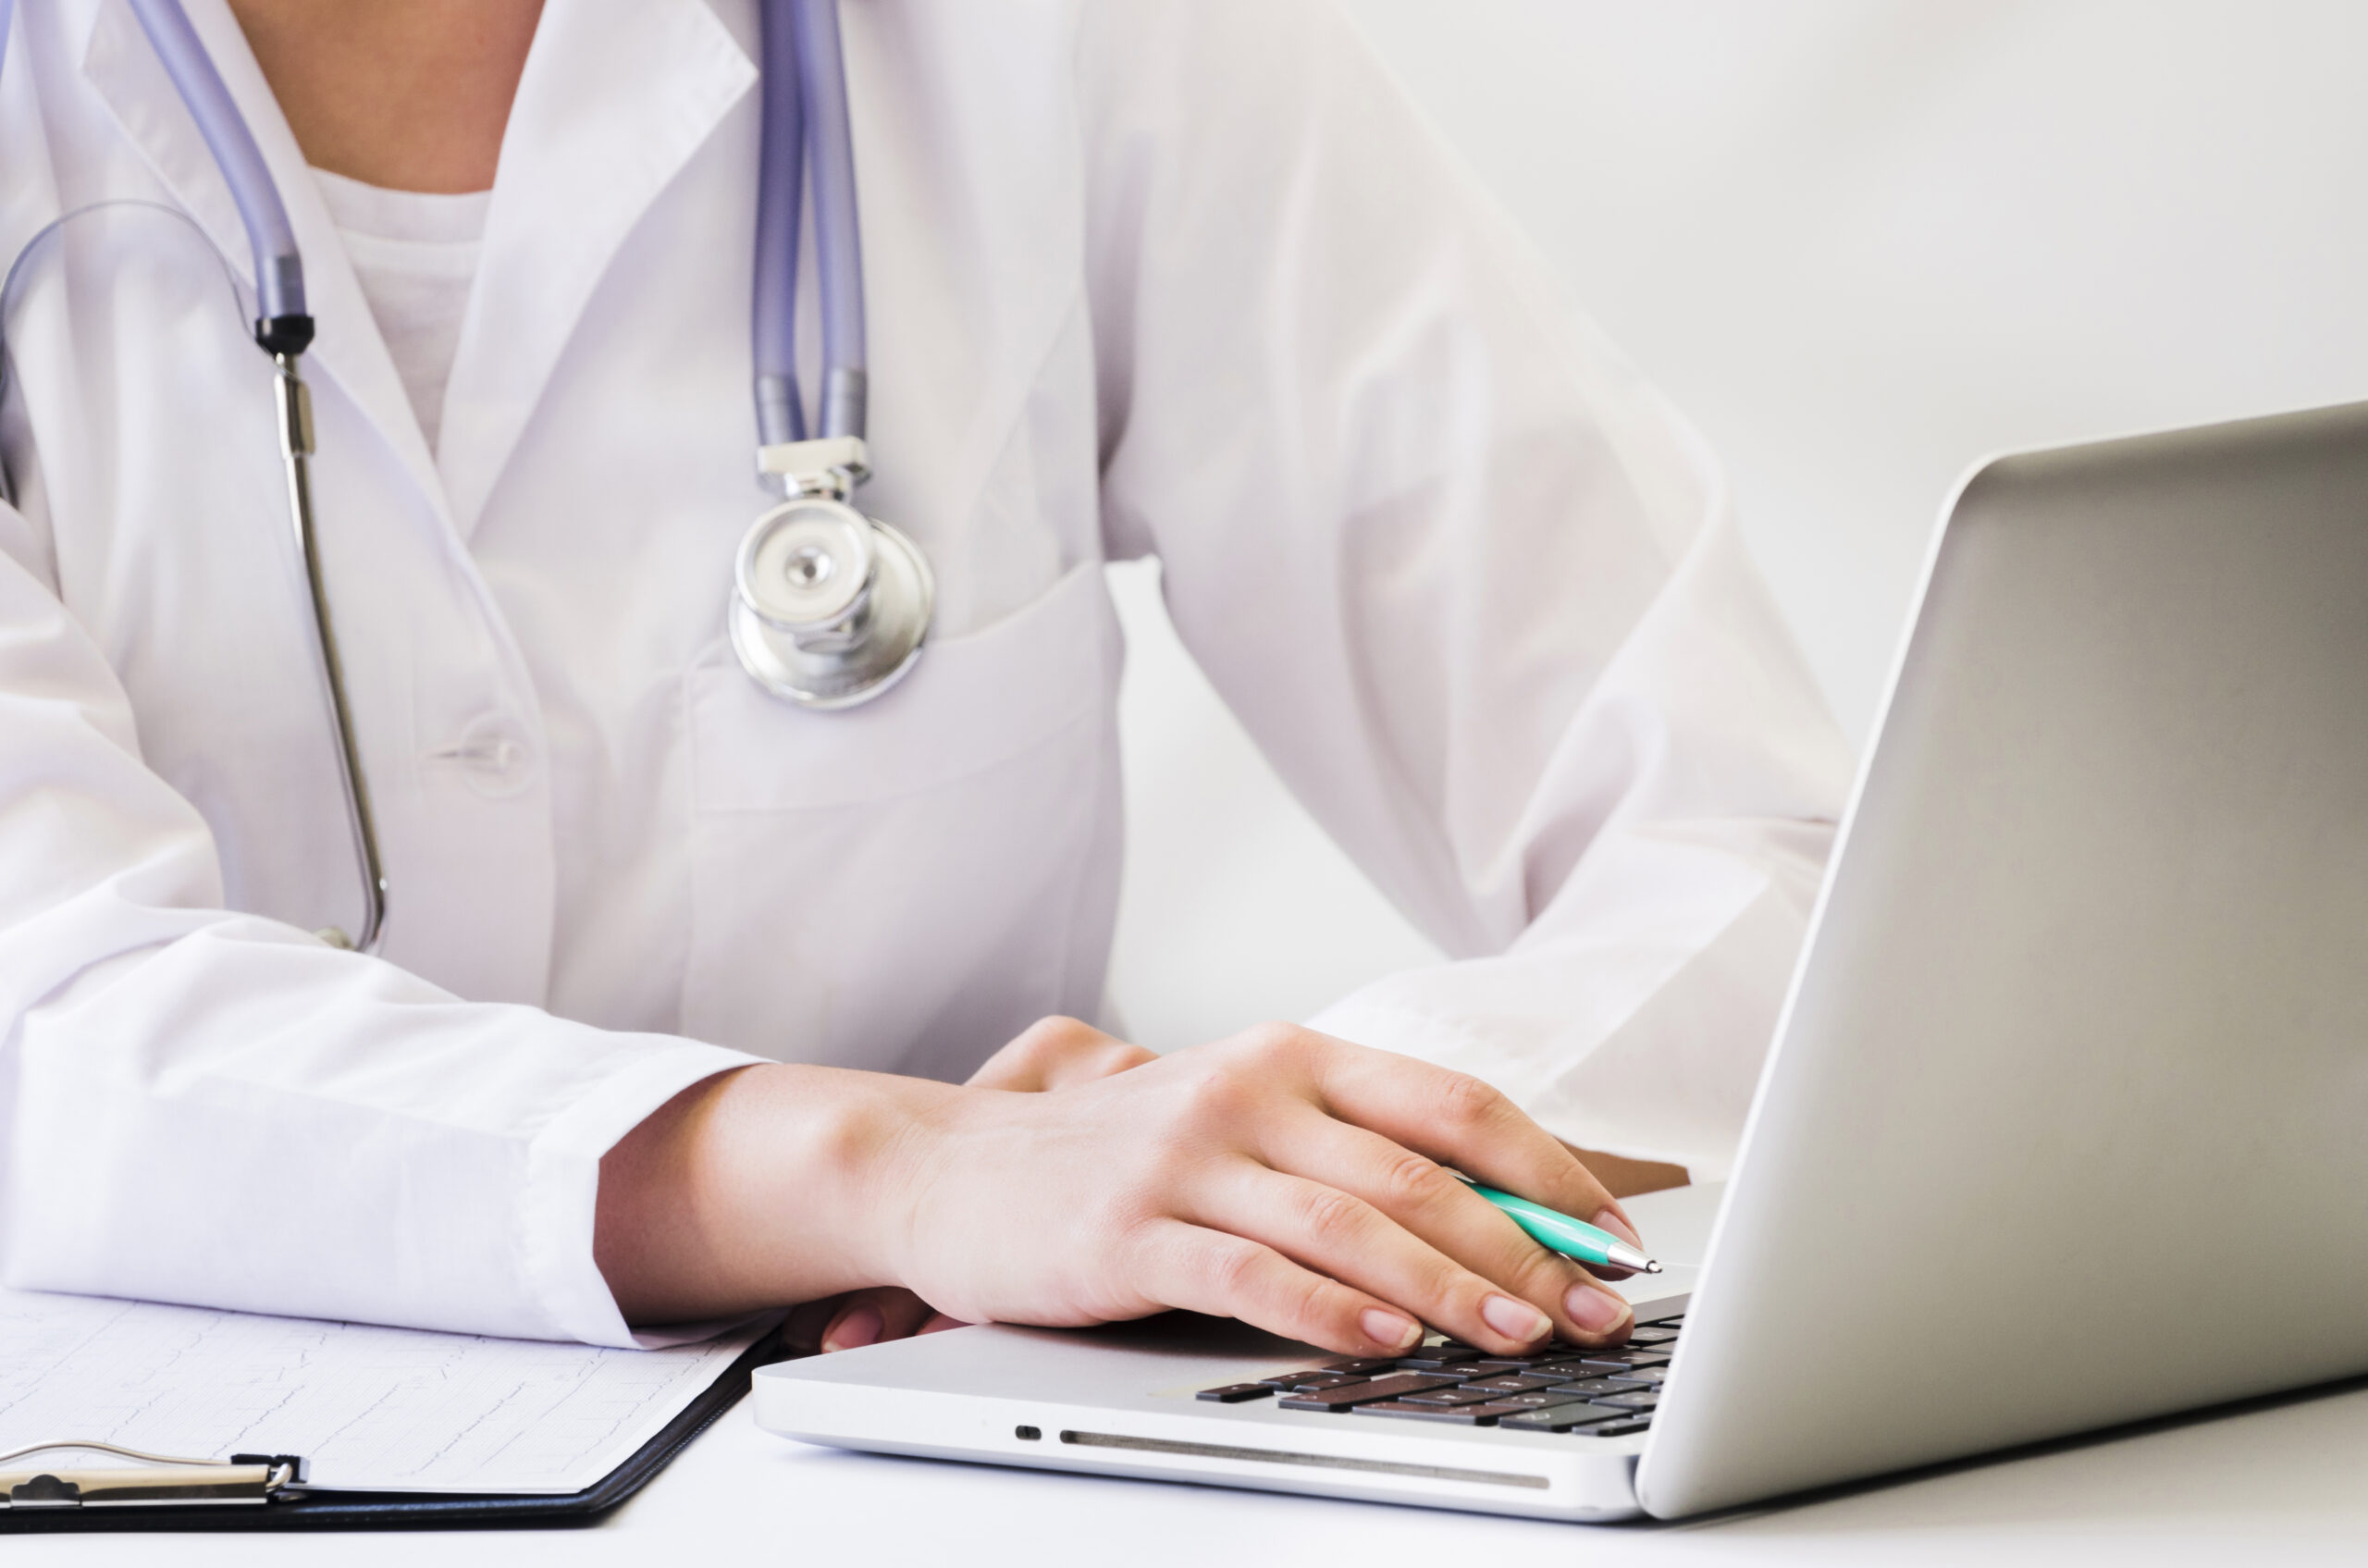 female-doctor-with-stethoscope-around-her-neck-using-laptop-desk